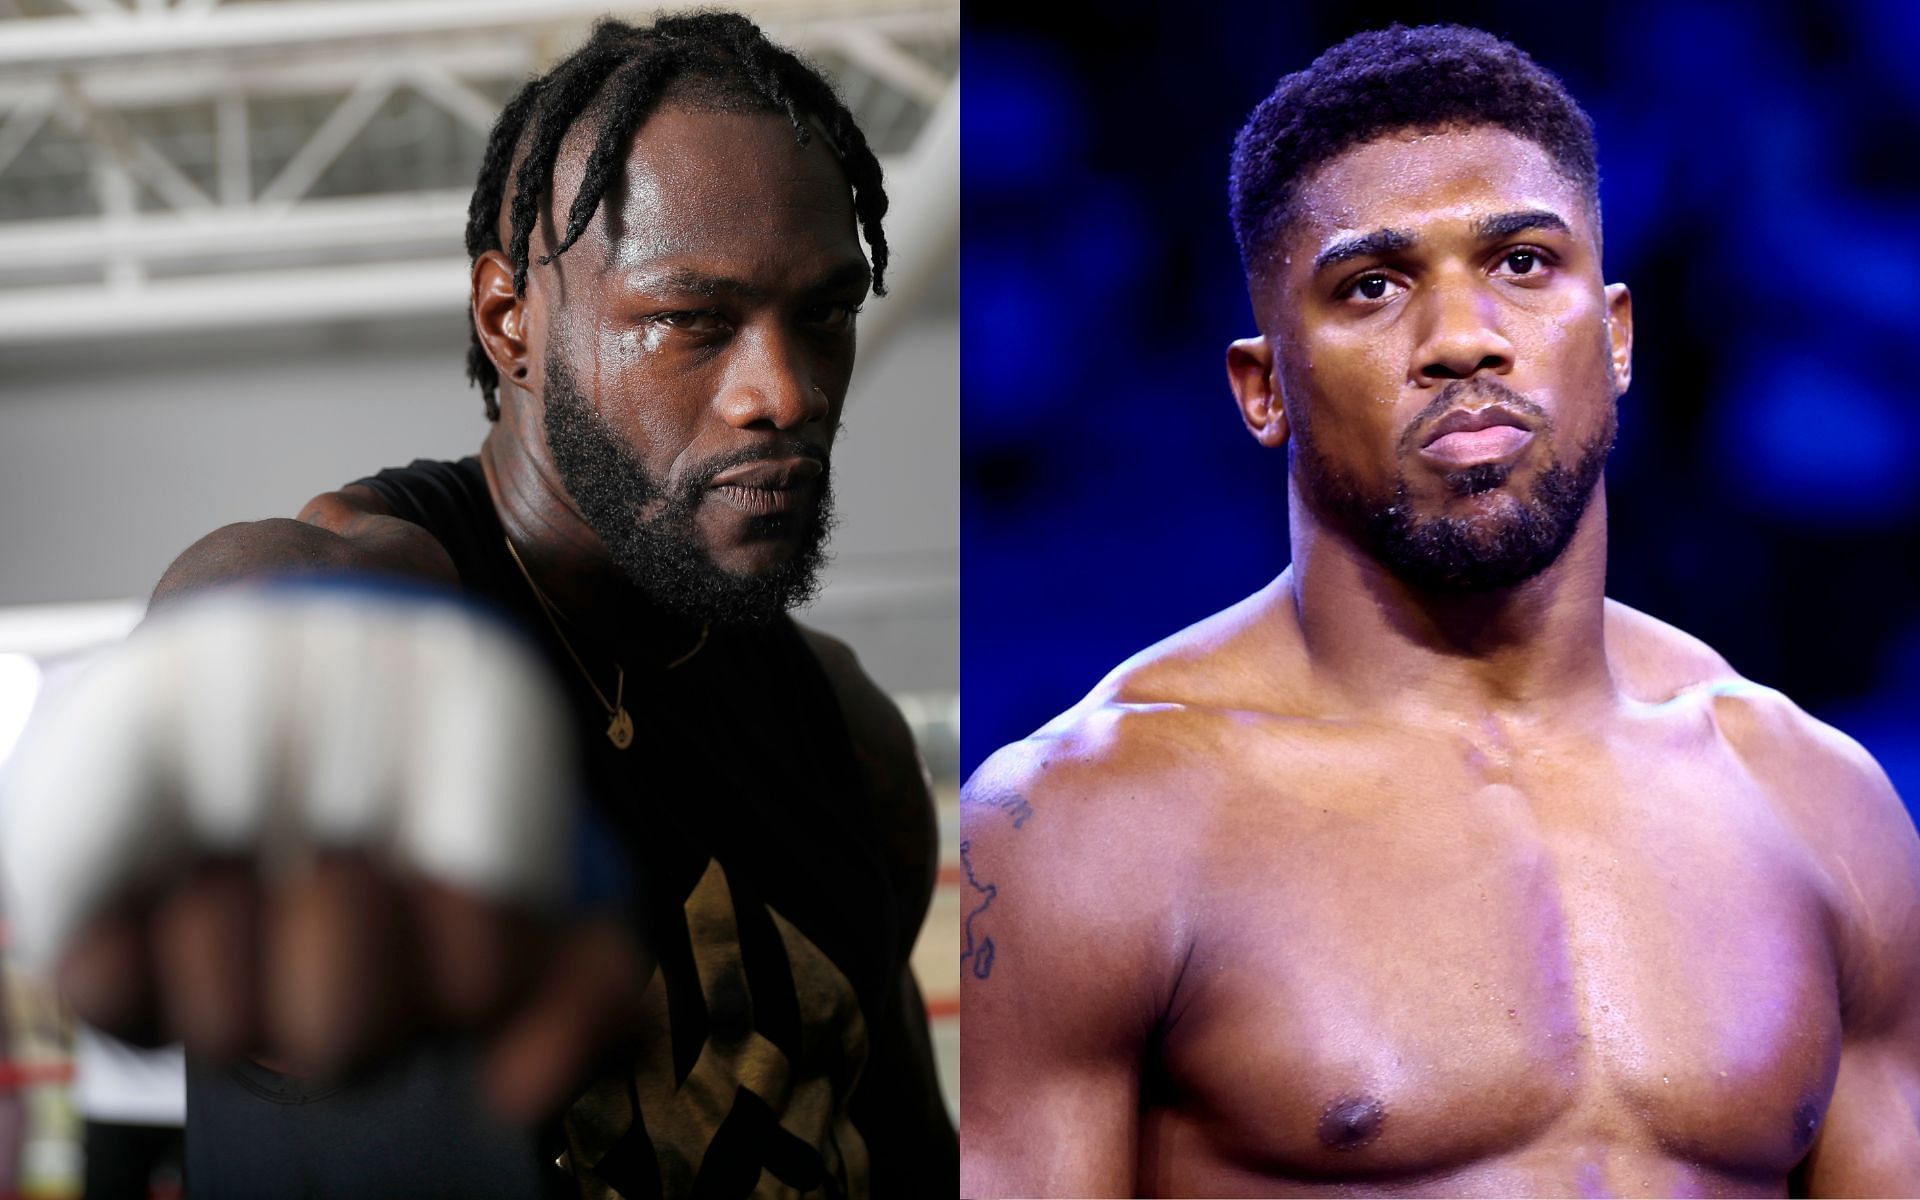 Deontay Wilder (left) and Anthony Joshua (right). [via Getty Images]